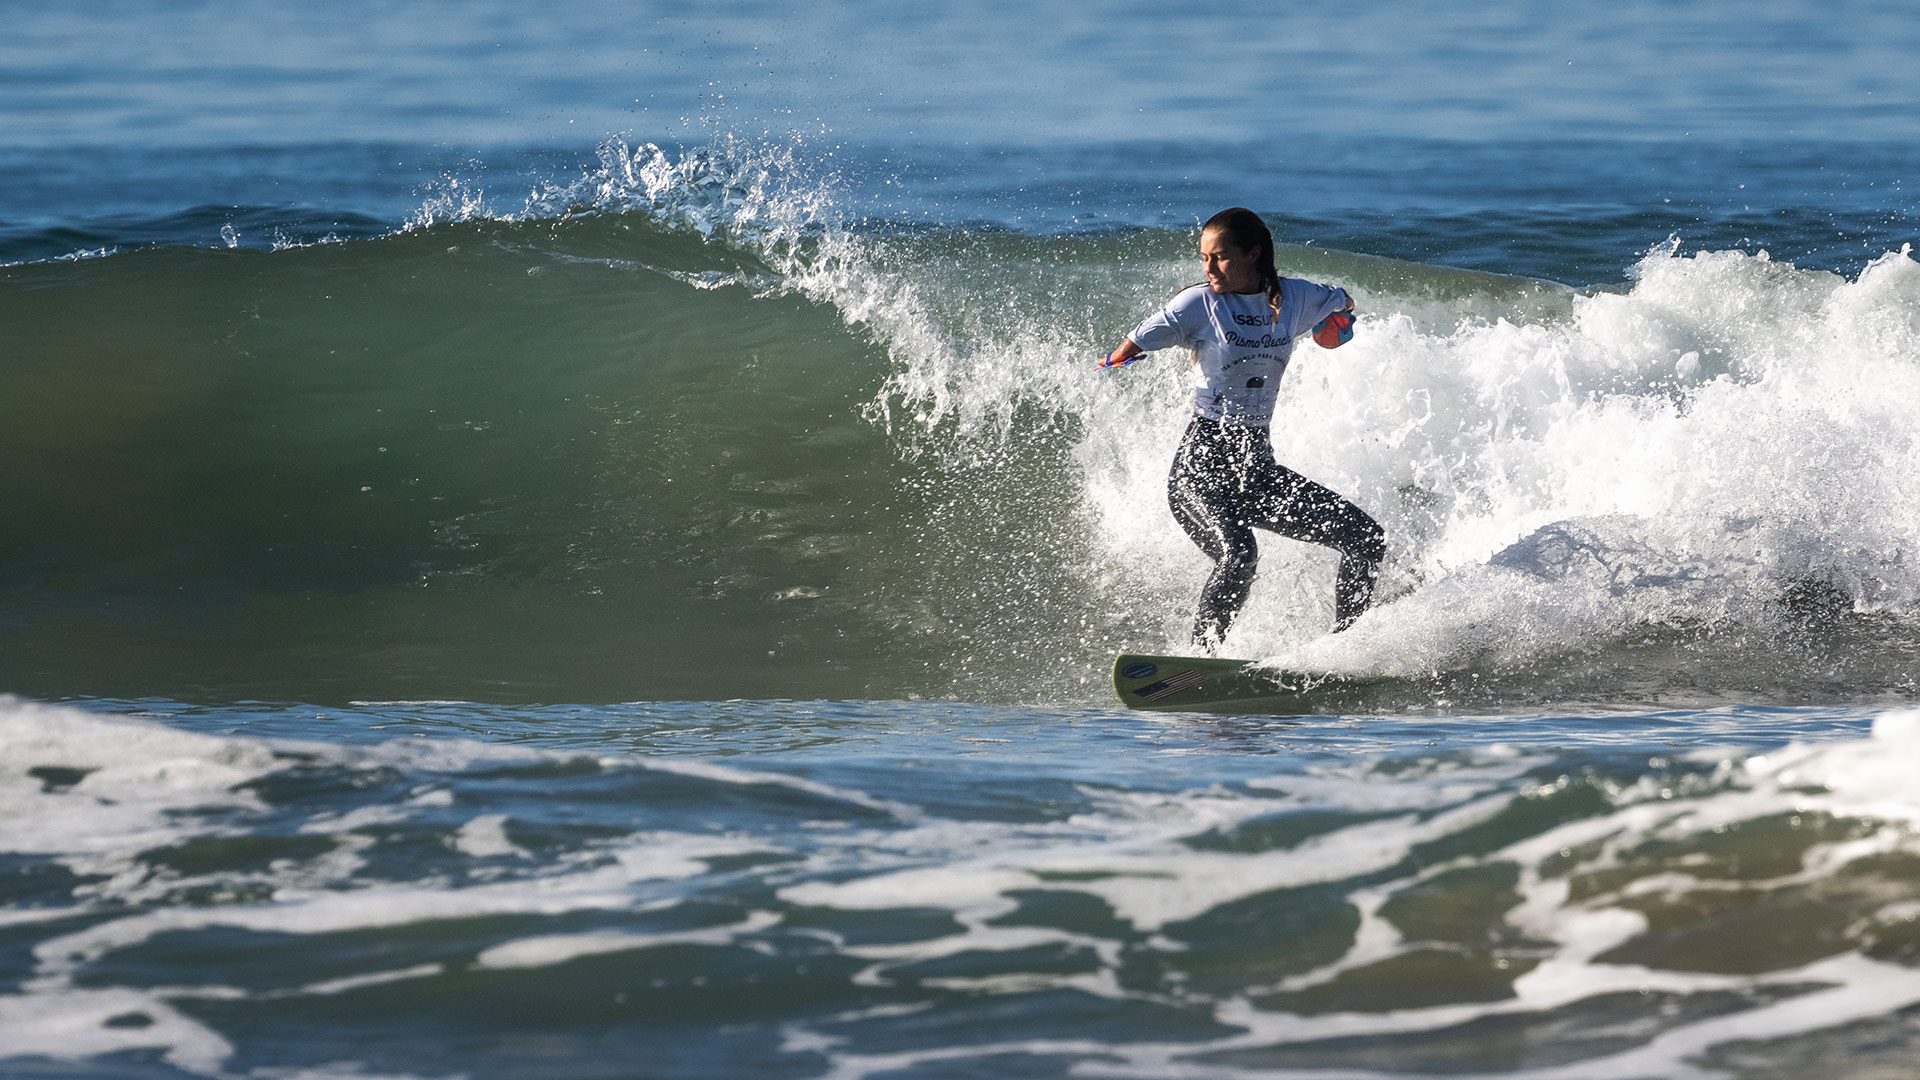 American adaptive surfer Liv Stone competes at the 2021 Adaptive Surfing World Championships in Pismo Beach, California (ISA/Sean Evans)